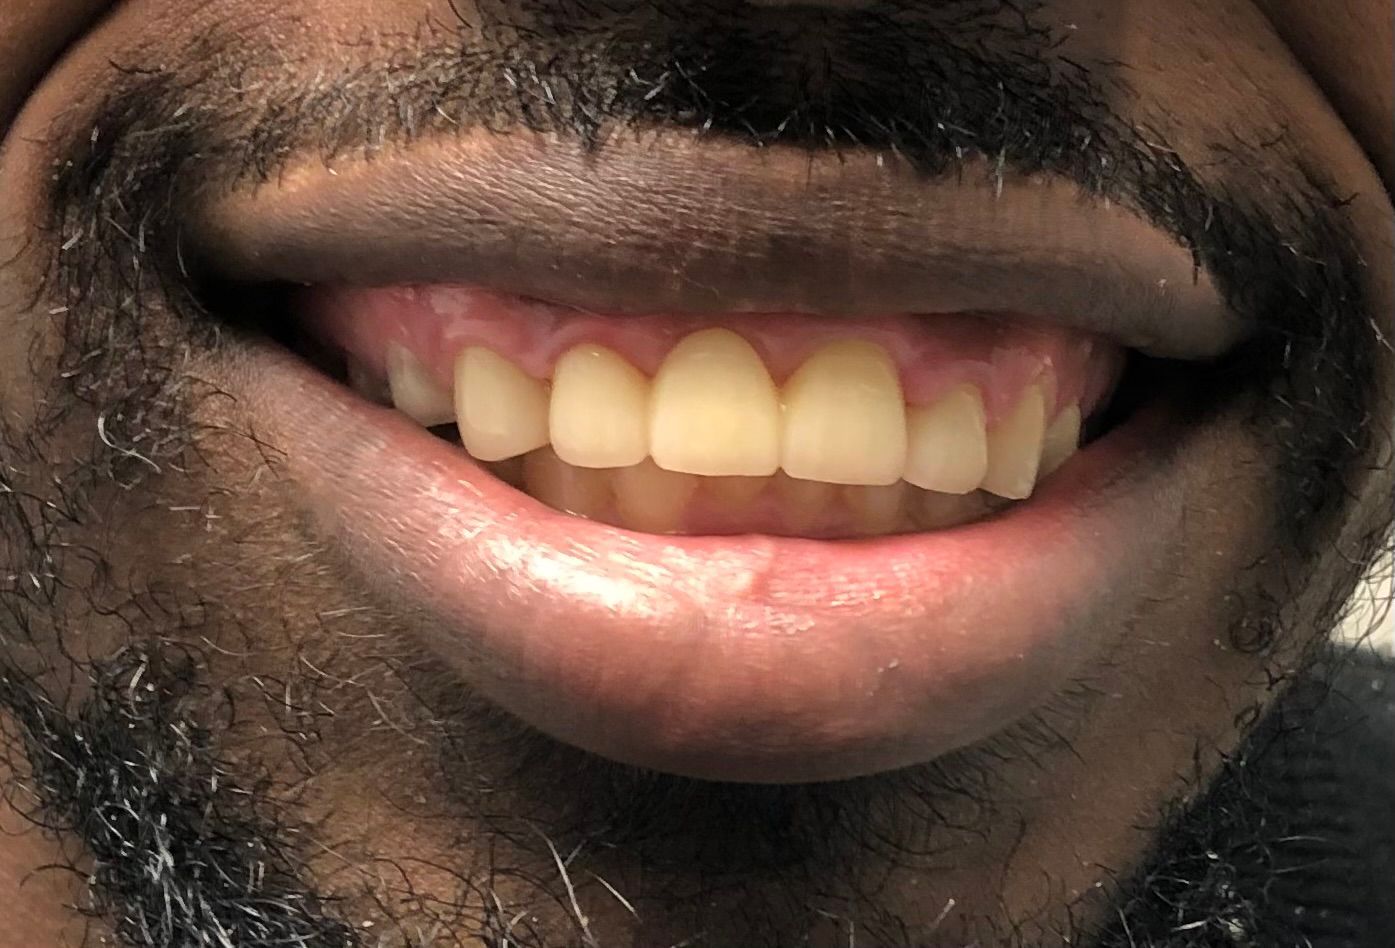 a close up of a man 's teeth with a beard | Anterior bridge | Front Tooth Replacement | Full mouth restoration | Smile Makeover | Before and After Dental Treatment | Barclay Family Dental | Best Dentist For Family Dentistry, Dental Implants, and Cosmetic Dentistry in Cherry Hill, NJ